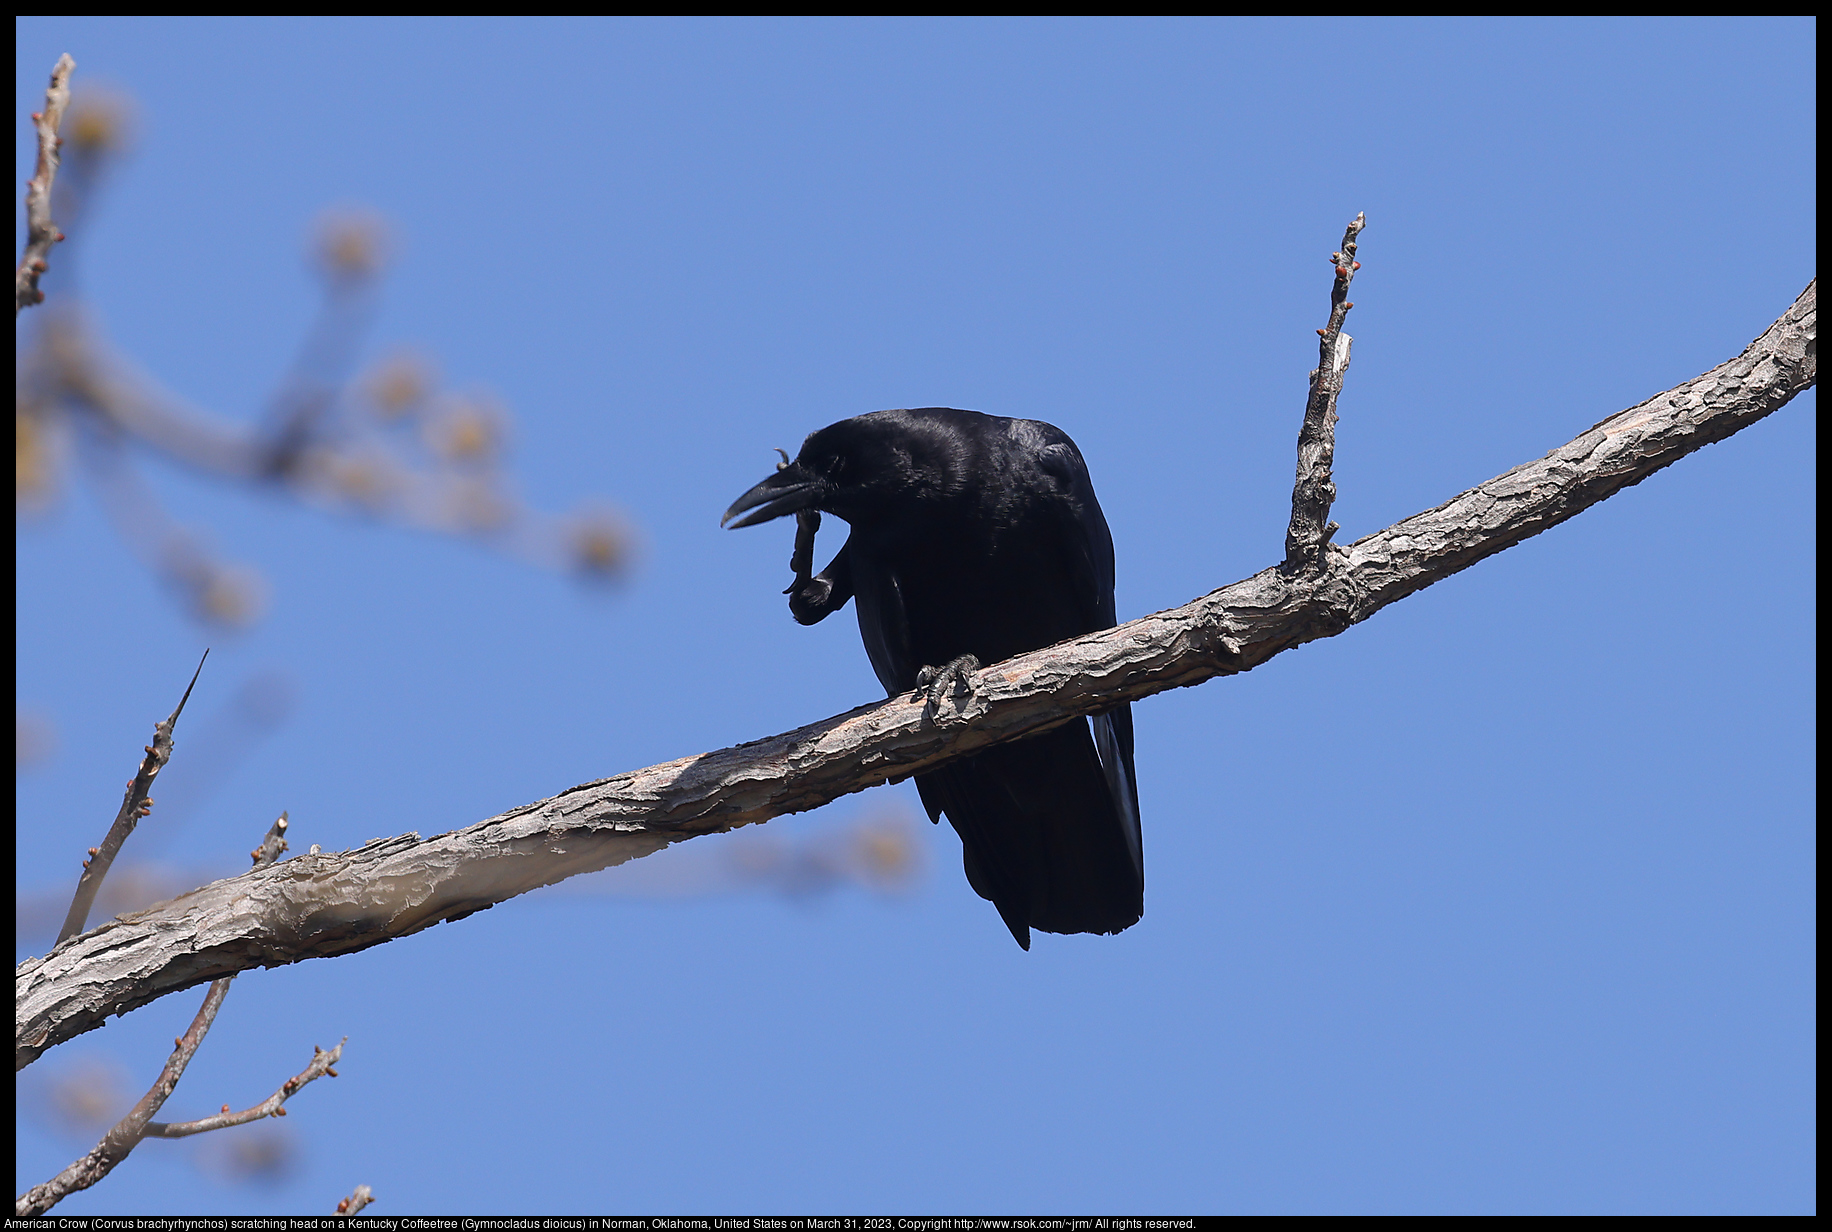 American Crow (Corvus brachyrhynchos) scratching head on a Kentucky Coffeetree (Gymnocladus dioicus) in Norman, Oklahoma, United States on March 31, 2023